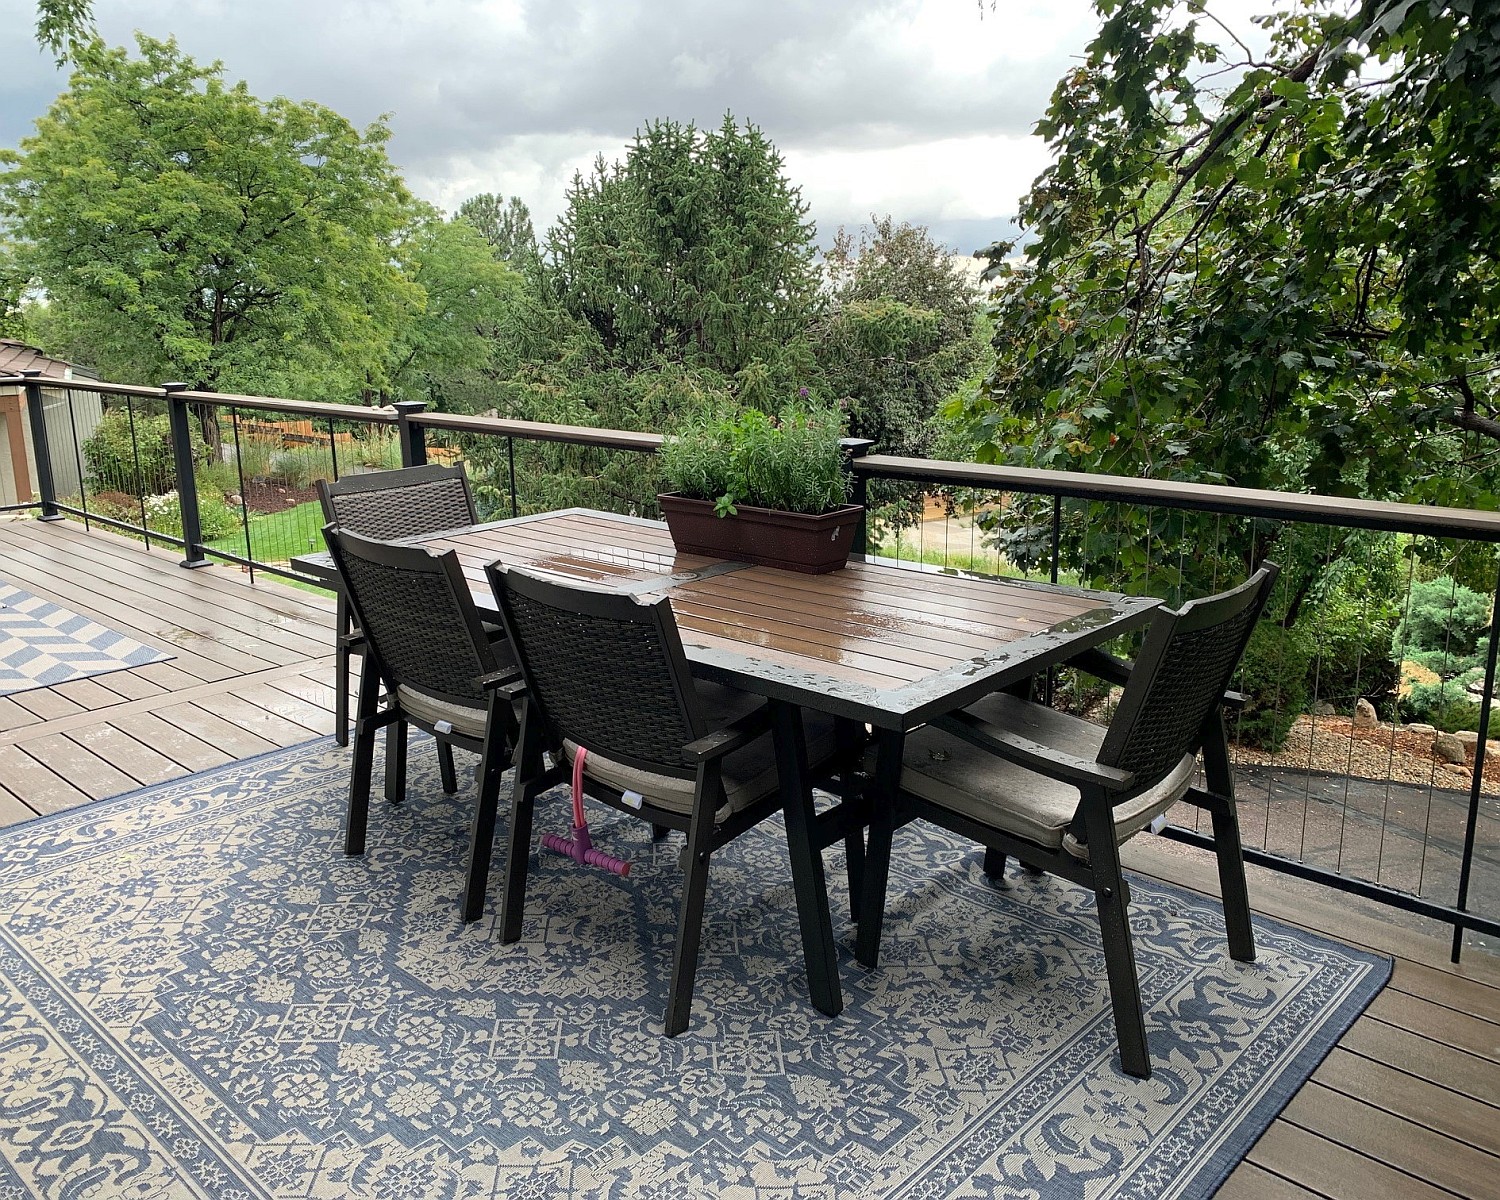 A composite deck with metal and cable railing. Homeowners have added outdoor rugs and dining area